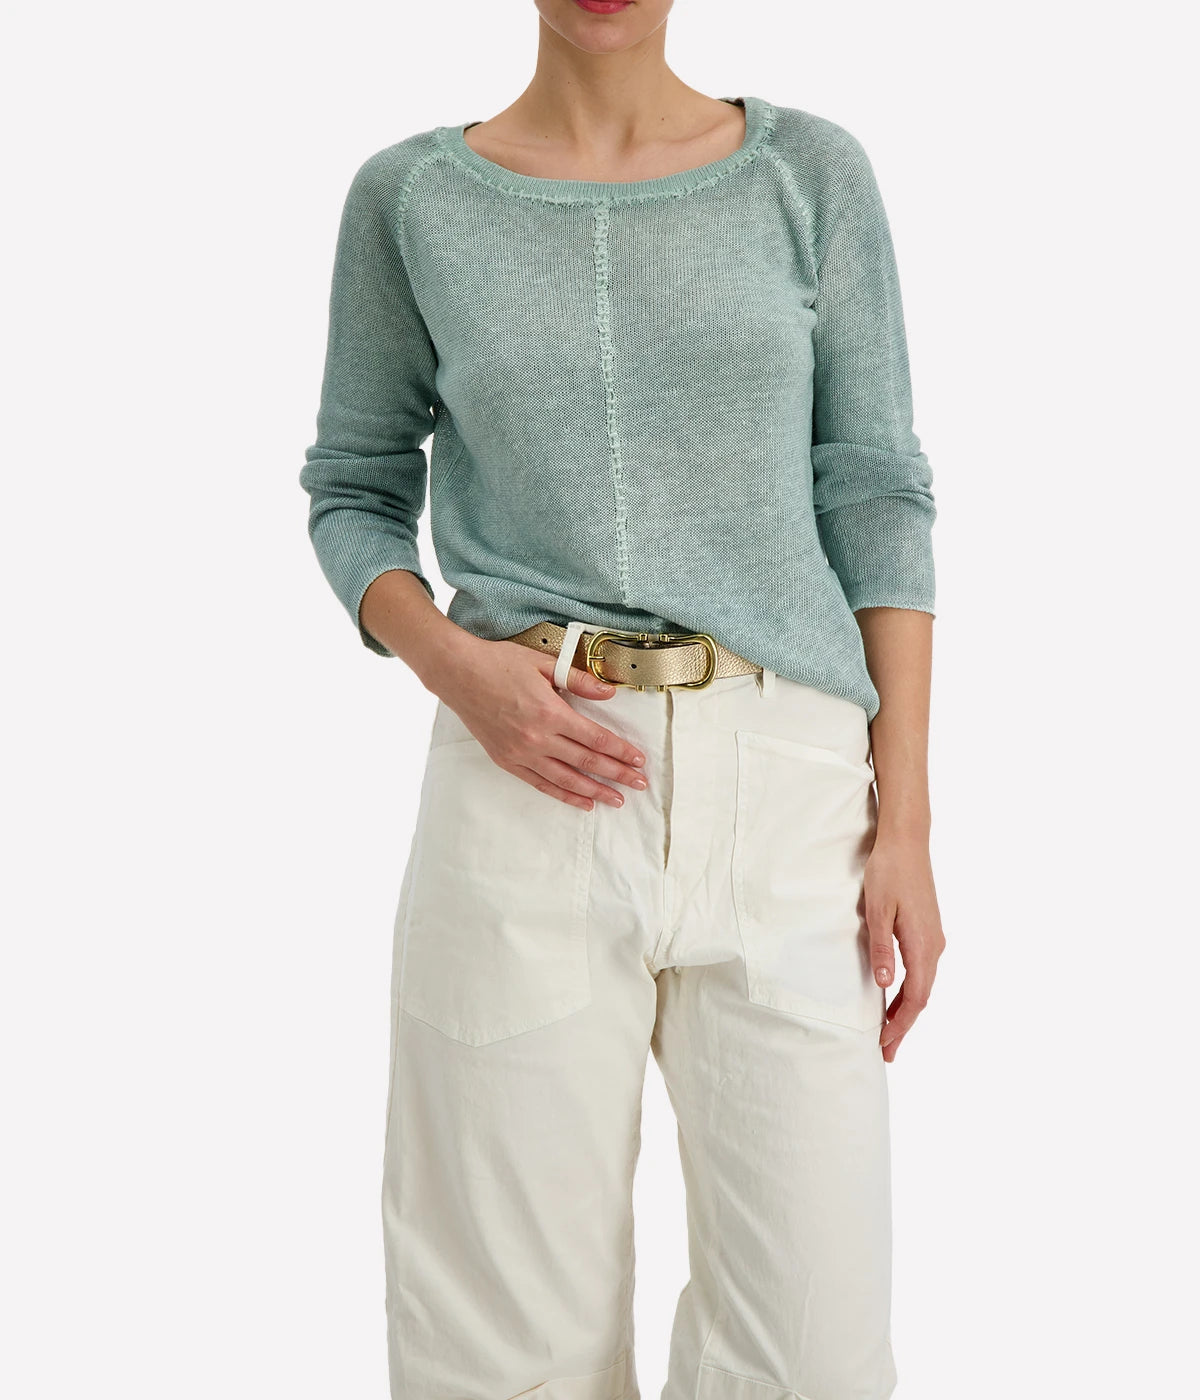 Dusty blue linen boatneck knit sweater with decorative accentuated stitching by Avant Toi